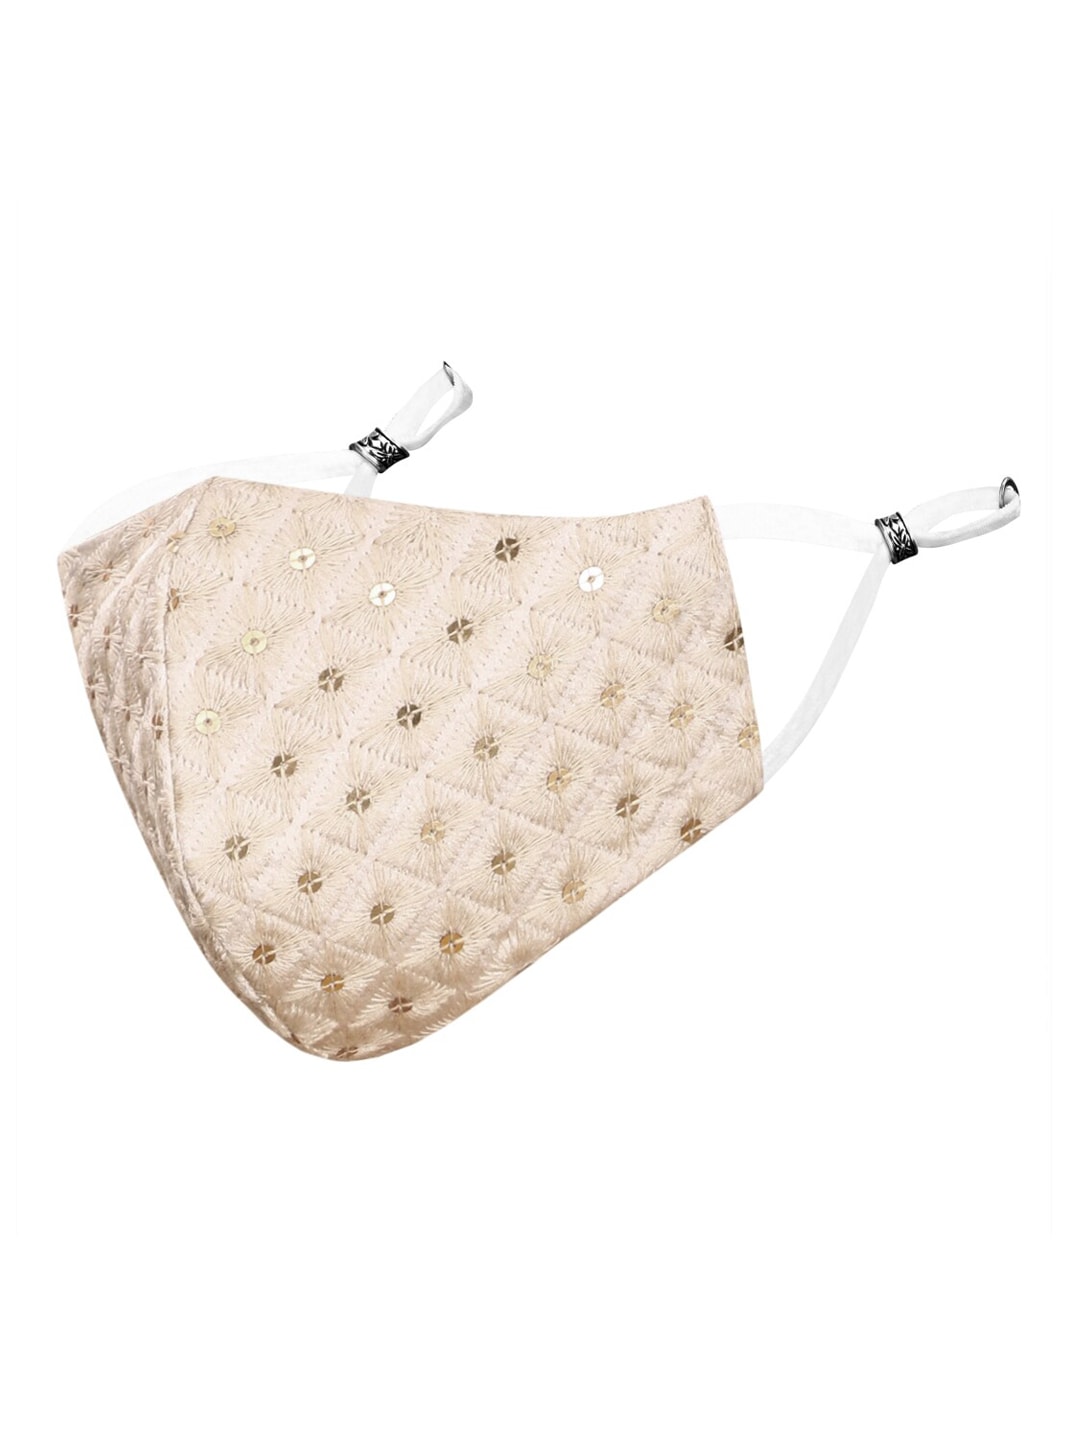 MASQ Beige Embroidered & Sequinned 4-Ply Reusable Anti-Pollution Cloth Mask Price in India